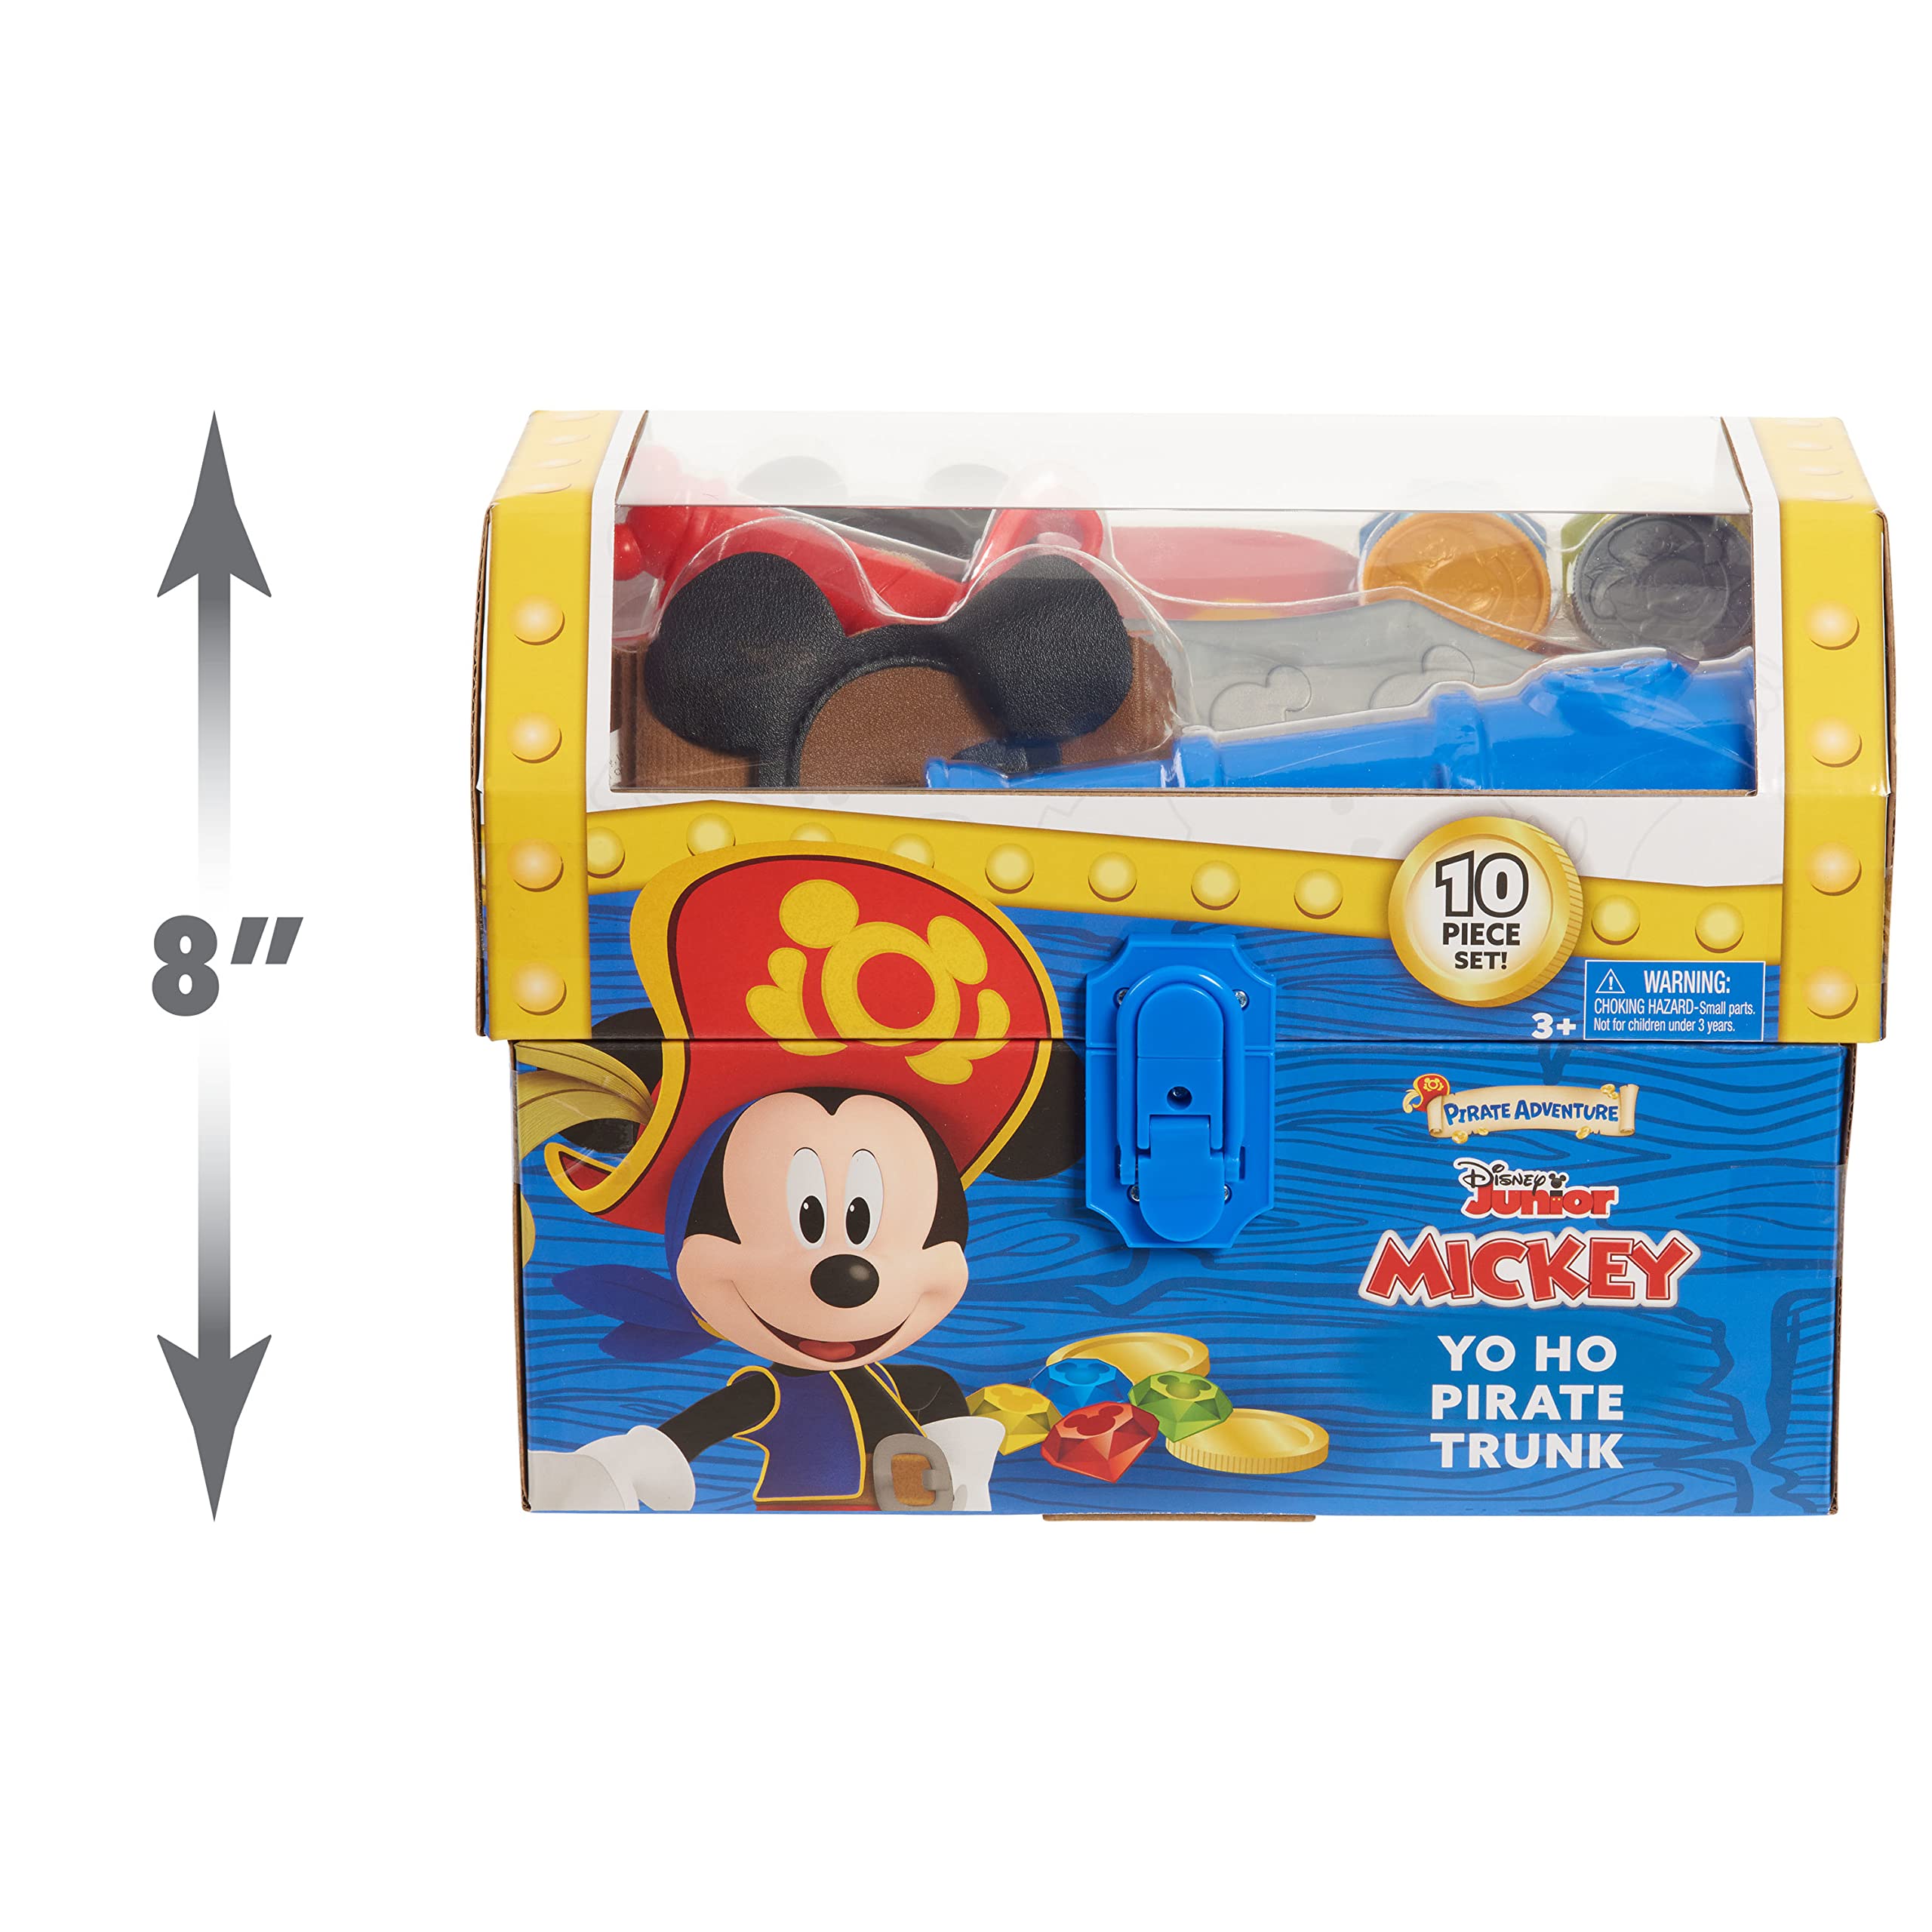 Disney Junior Mickey Mouse Funhouse Yo-Ho Pirate Trunk, Dress Up and Pretend Play, Officially Licensed Kids Toys for Ages 3 Up, Gifts and Presents by Just Play